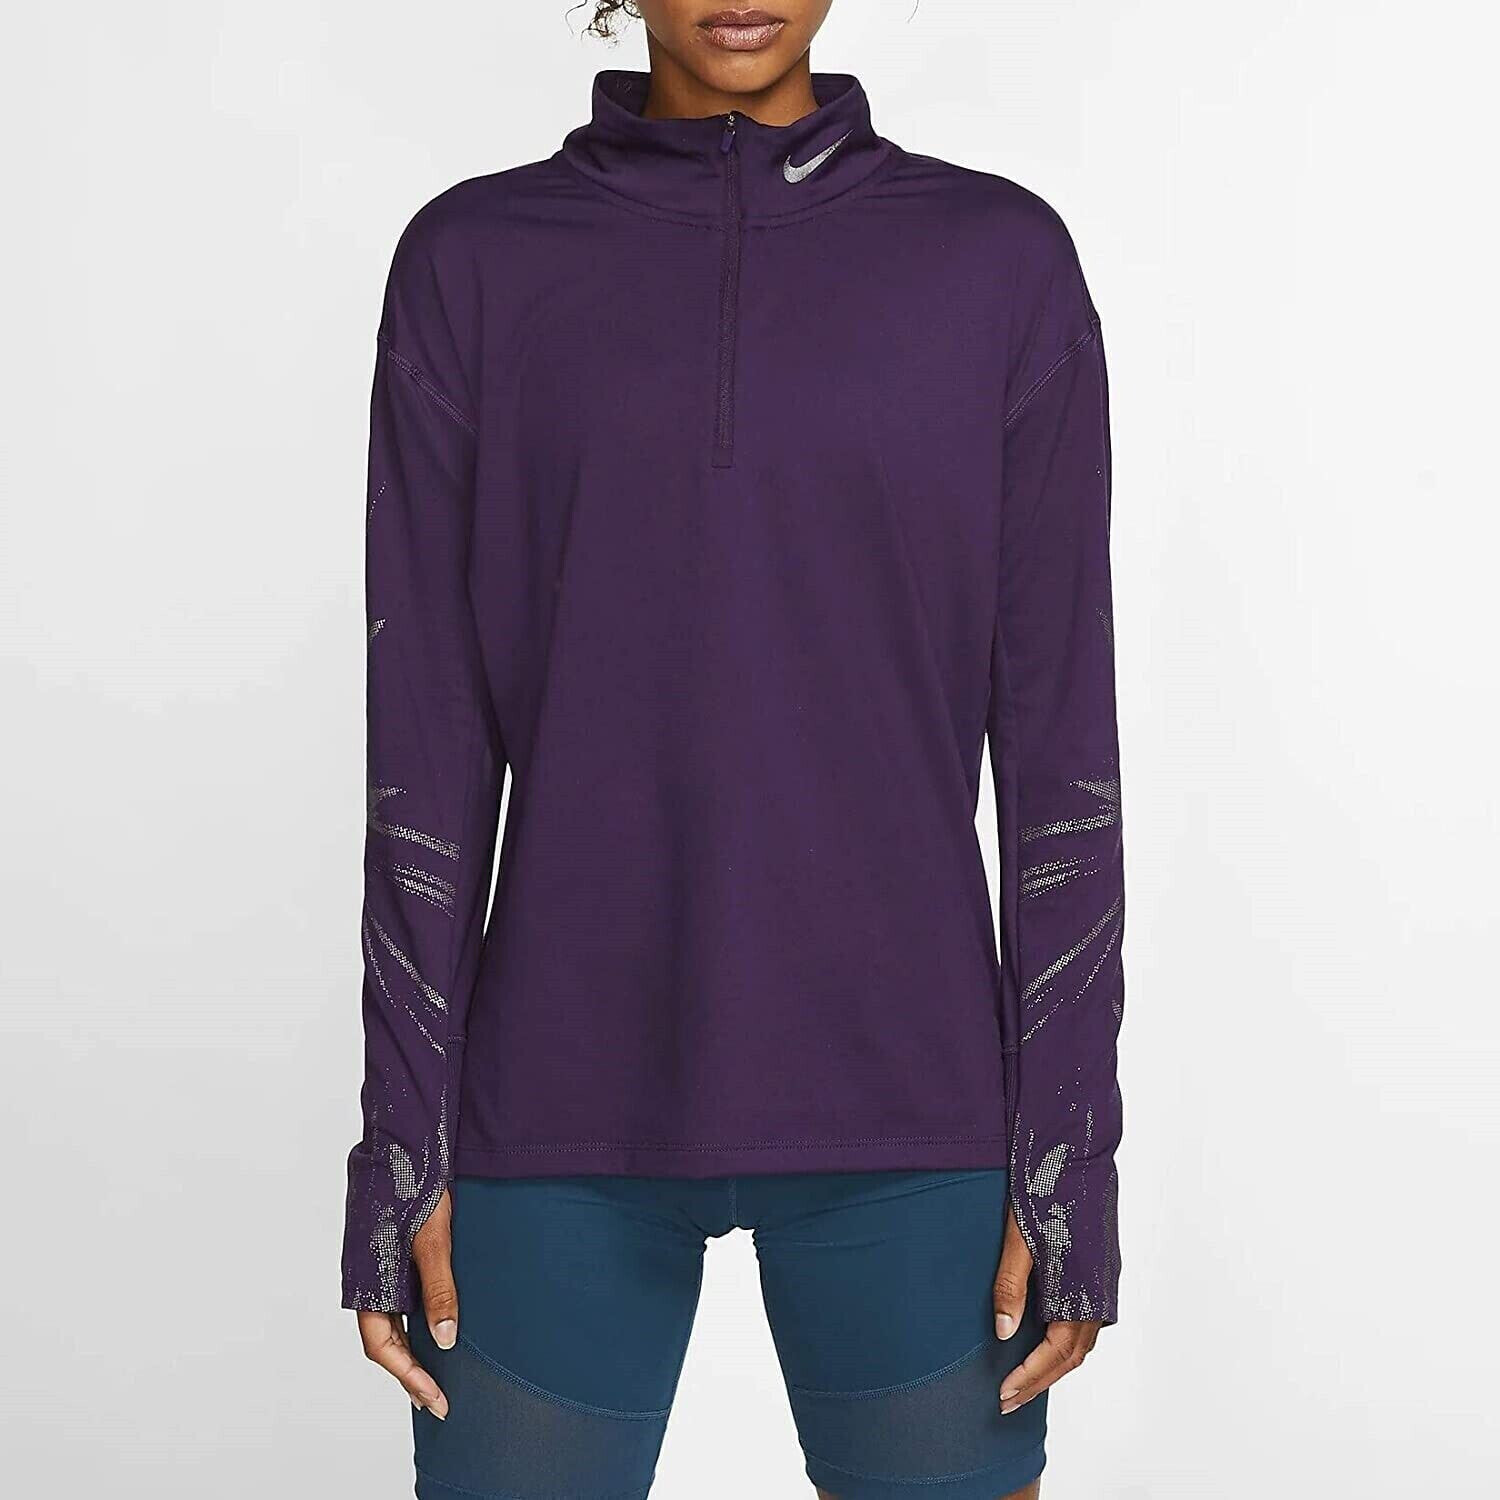 Nike 247265 Womens Dry Element Running Top Jacket Purple Size Small